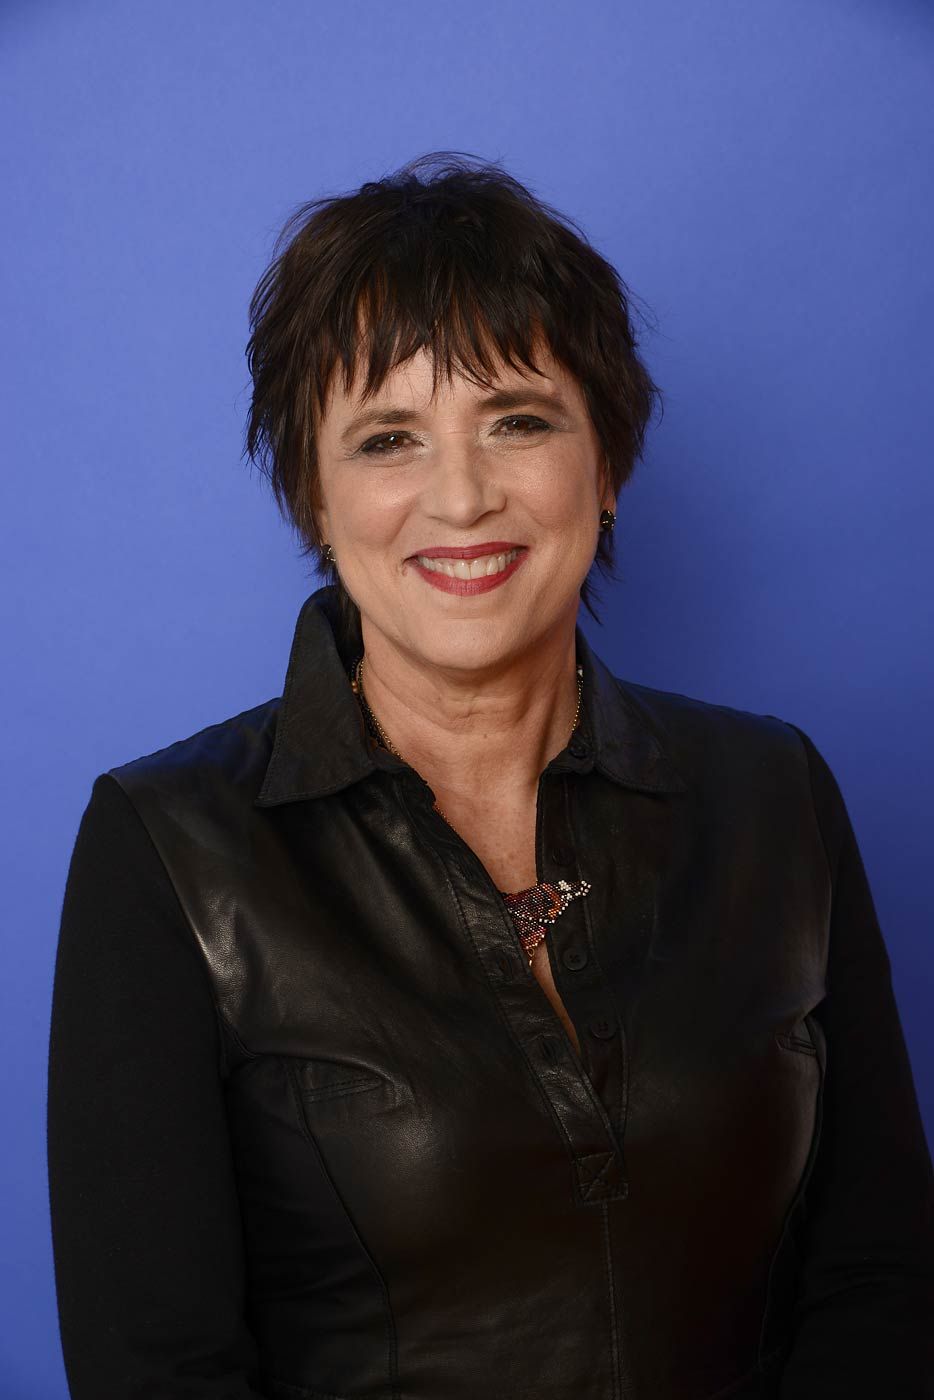 Pictures of Eve Ensler